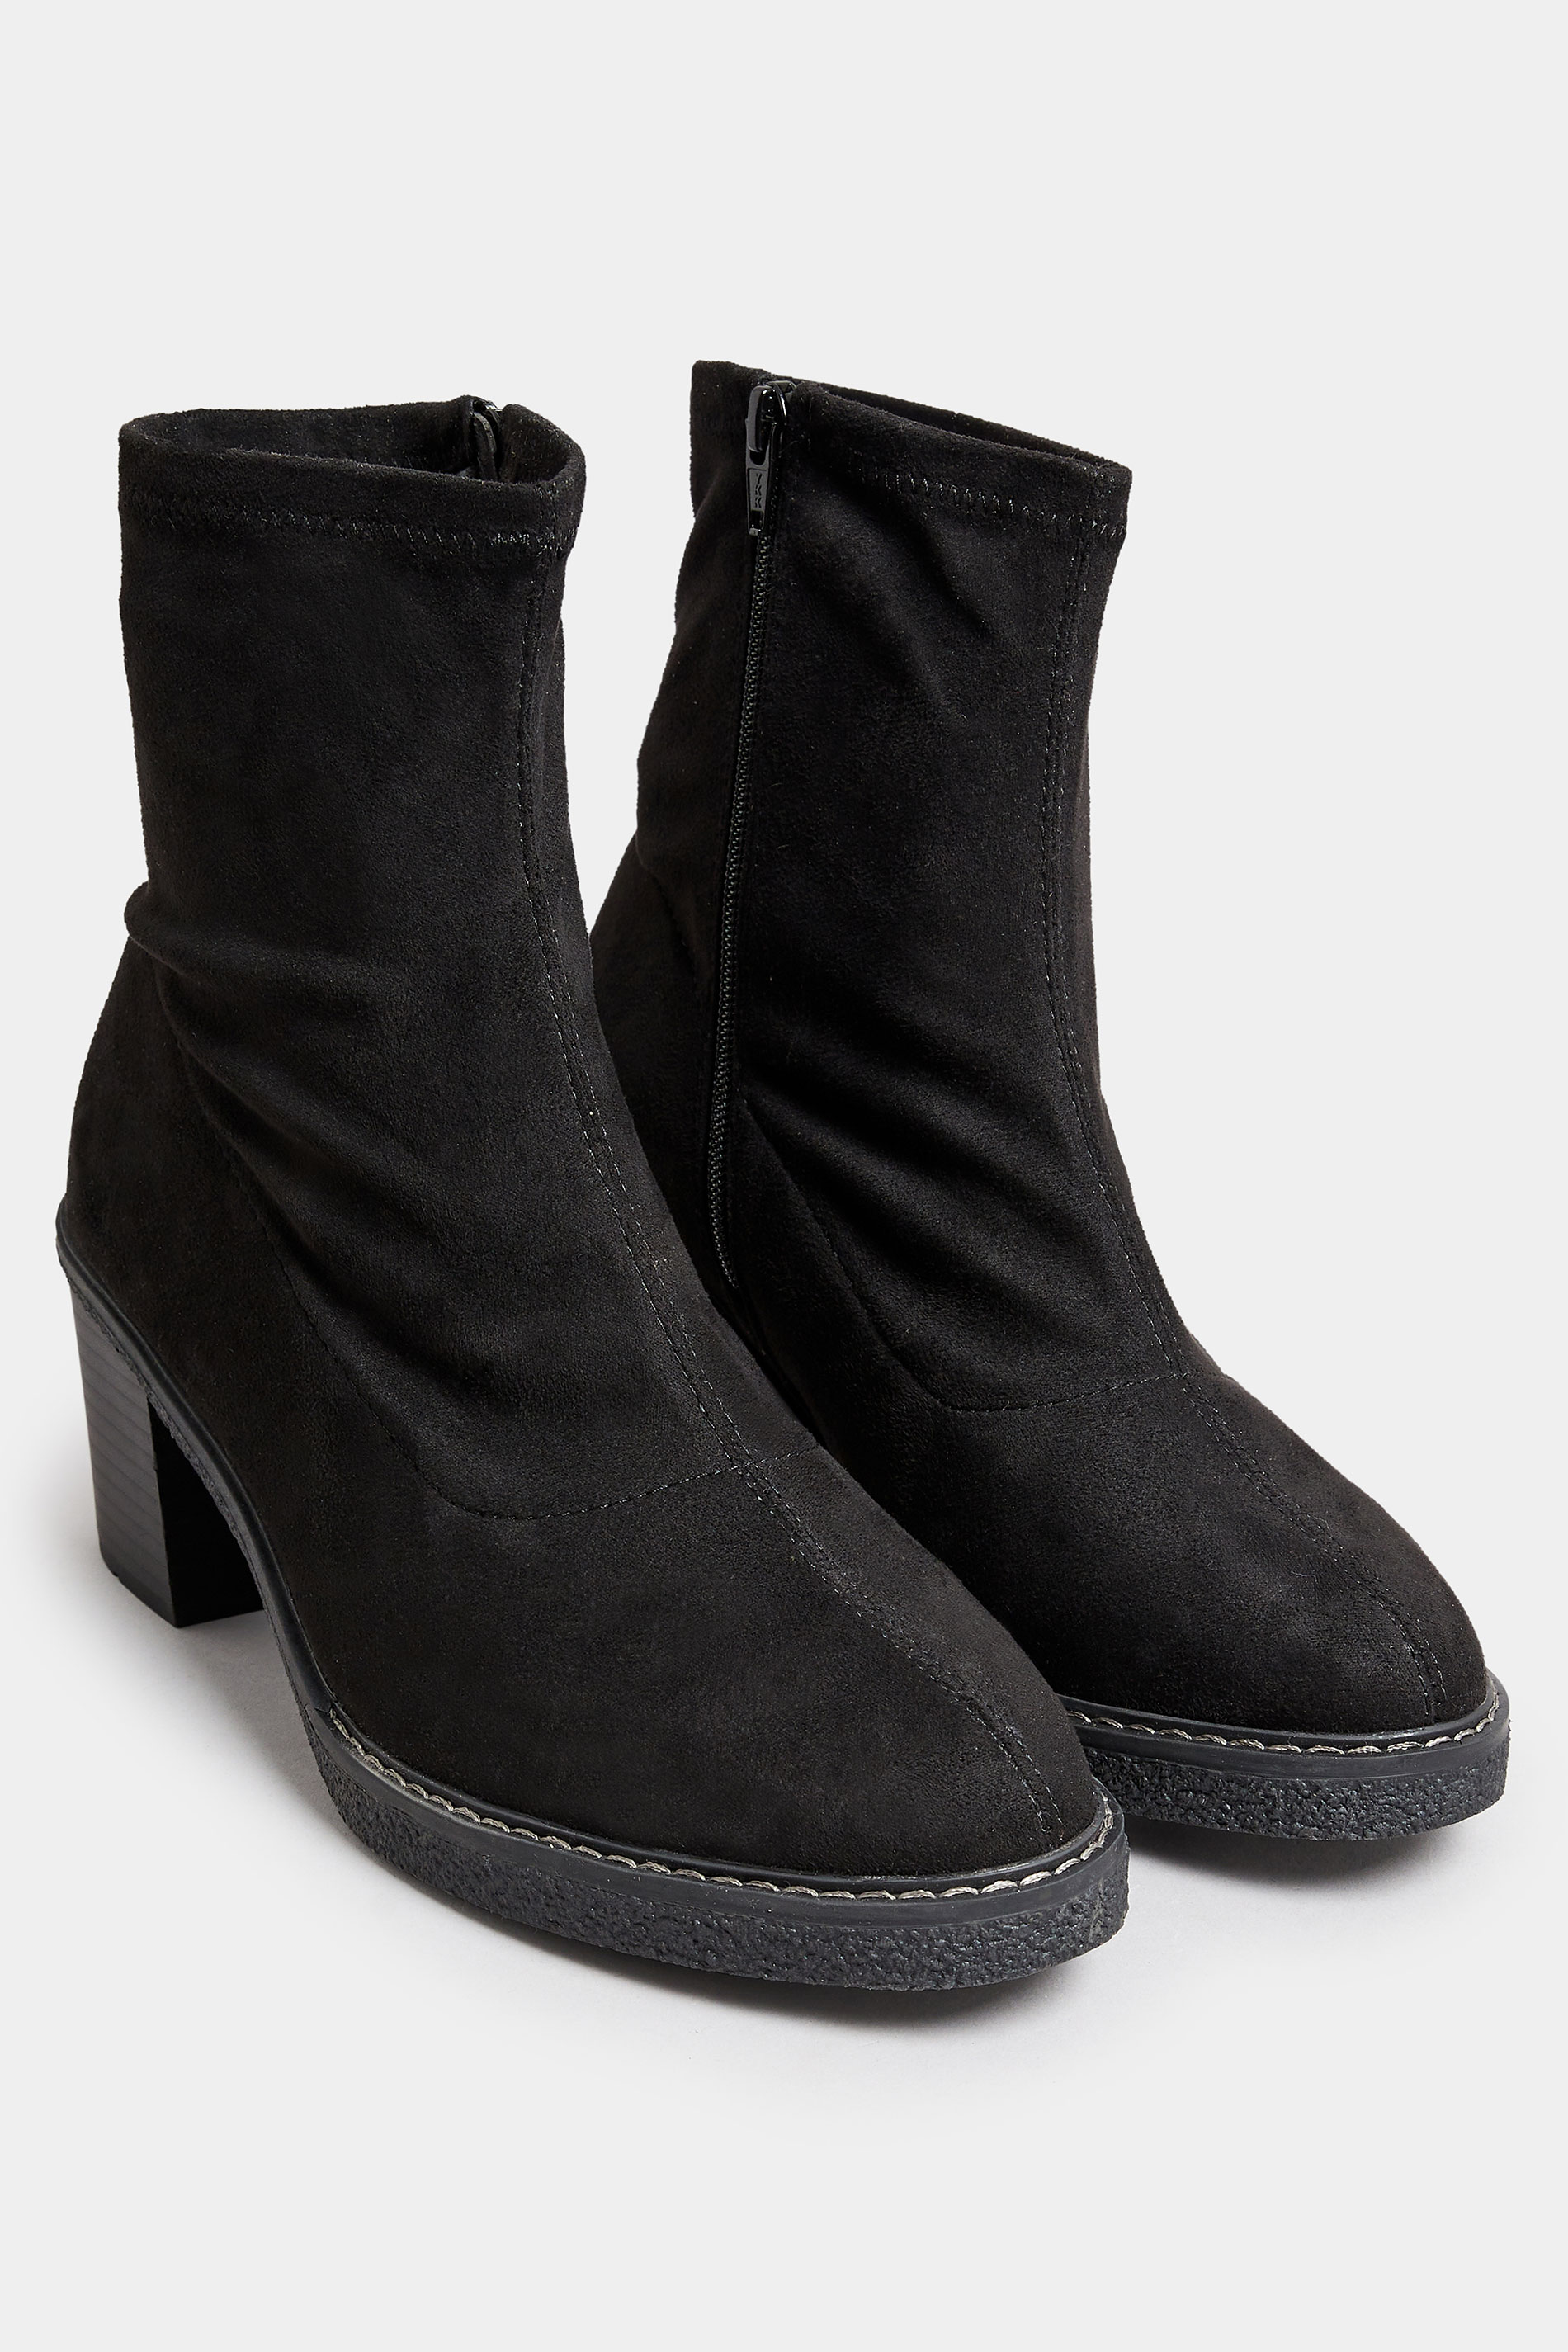 Evans Black Faux Suede Heeled Ankle Boots 2